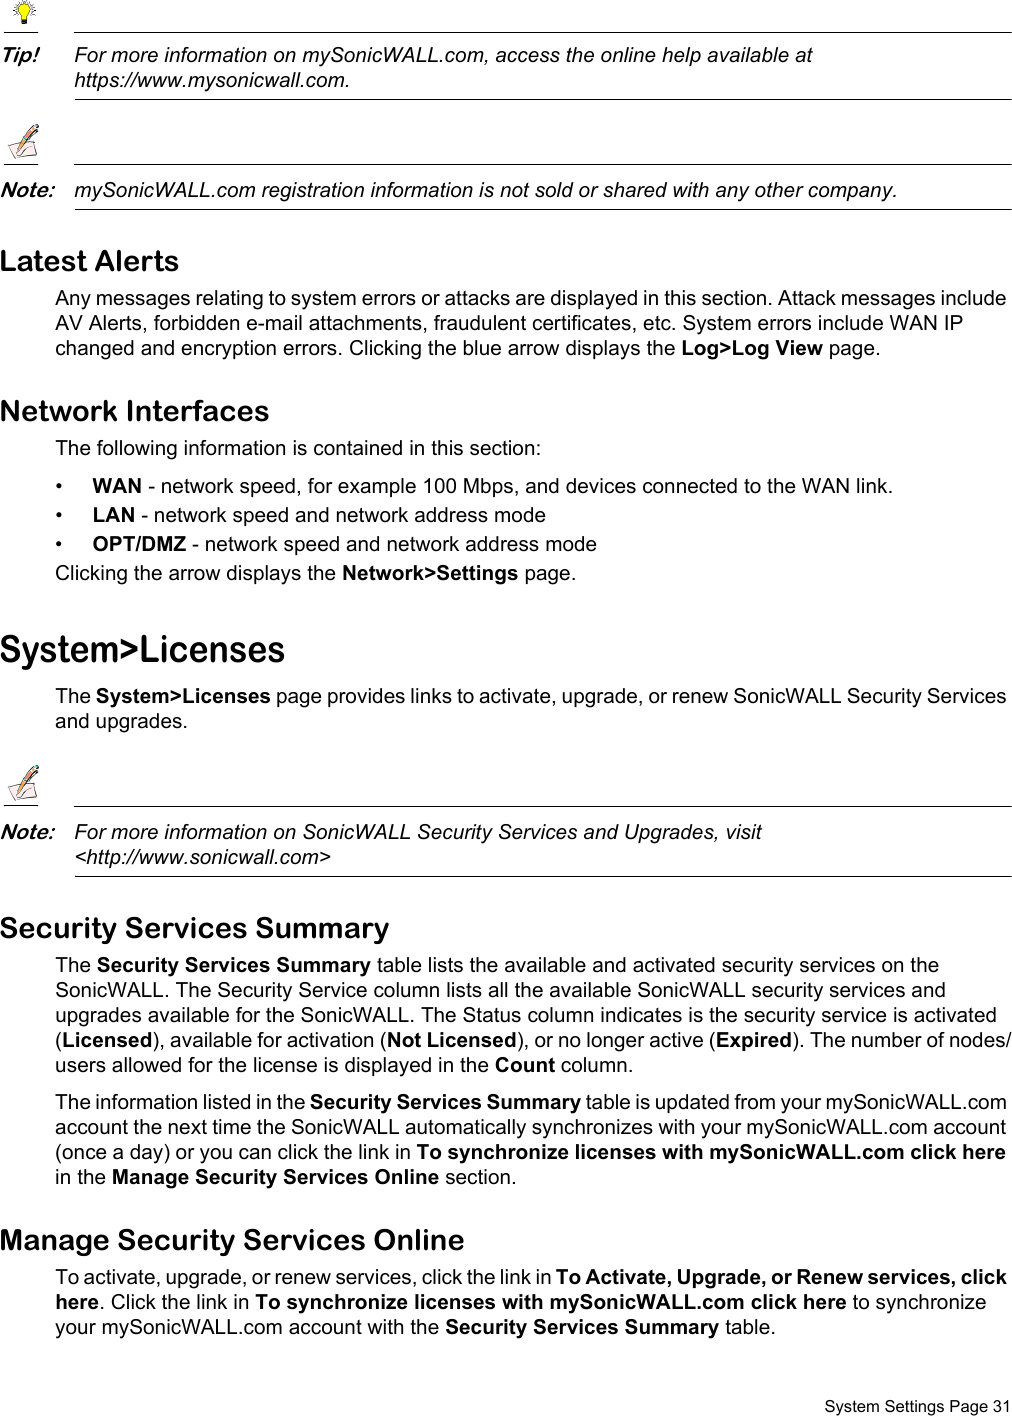  System Settings Page 31Tip!For more information on mySonicWALL.com, access the online help available at https://www.mysonicwall.com.Note:mySonicWALL.com registration information is not sold or shared with any other company.Latest AlertsAny messages relating to system errors or attacks are displayed in this section. Attack messages include AV Alerts, forbidden e-mail attachments, fraudulent certificates, etc. System errors include WAN IP changed and encryption errors. Clicking the blue arrow displays the Log&gt;Log View page. Network InterfacesThe following information is contained in this section:•WAN - network speed, for example 100 Mbps, and devices connected to the WAN link.•LAN - network speed and network address mode•OPT/DMZ - network speed and network address modeClicking the arrow displays the Network&gt;Settings page. System&gt;LicensesThe System&gt;Licenses page provides links to activate, upgrade, or renew SonicWALL Security Services and upgrades.Note:For more information on SonicWALL Security Services and Upgrades, visit &lt;http://www.sonicwall.com&gt;Security Services SummaryThe Security Services Summary table lists the available and activated security services on the SonicWALL. The Security Service column lists all the available SonicWALL security services and upgrades available for the SonicWALL. The Status column indicates is the security service is activated (Licensed), available for activation (Not Licensed), or no longer active (Expired). The number of nodes/users allowed for the license is displayed in the Count column.The information listed in the Security Services Summary table is updated from your mySonicWALL.com account the next time the SonicWALL automatically synchronizes with your mySonicWALL.com account (once a day) or you can click the link in To synchronize licenses with mySonicWALL.com click here in the Manage Security Services Online section.Manage Security Services OnlineTo activate, upgrade, or renew services, click the link in To Activate, Upgrade, or Renew services, click here. Click the link in To synchronize licenses with mySonicWALL.com click here to synchronize your mySonicWALL.com account with the Security Services Summary table.